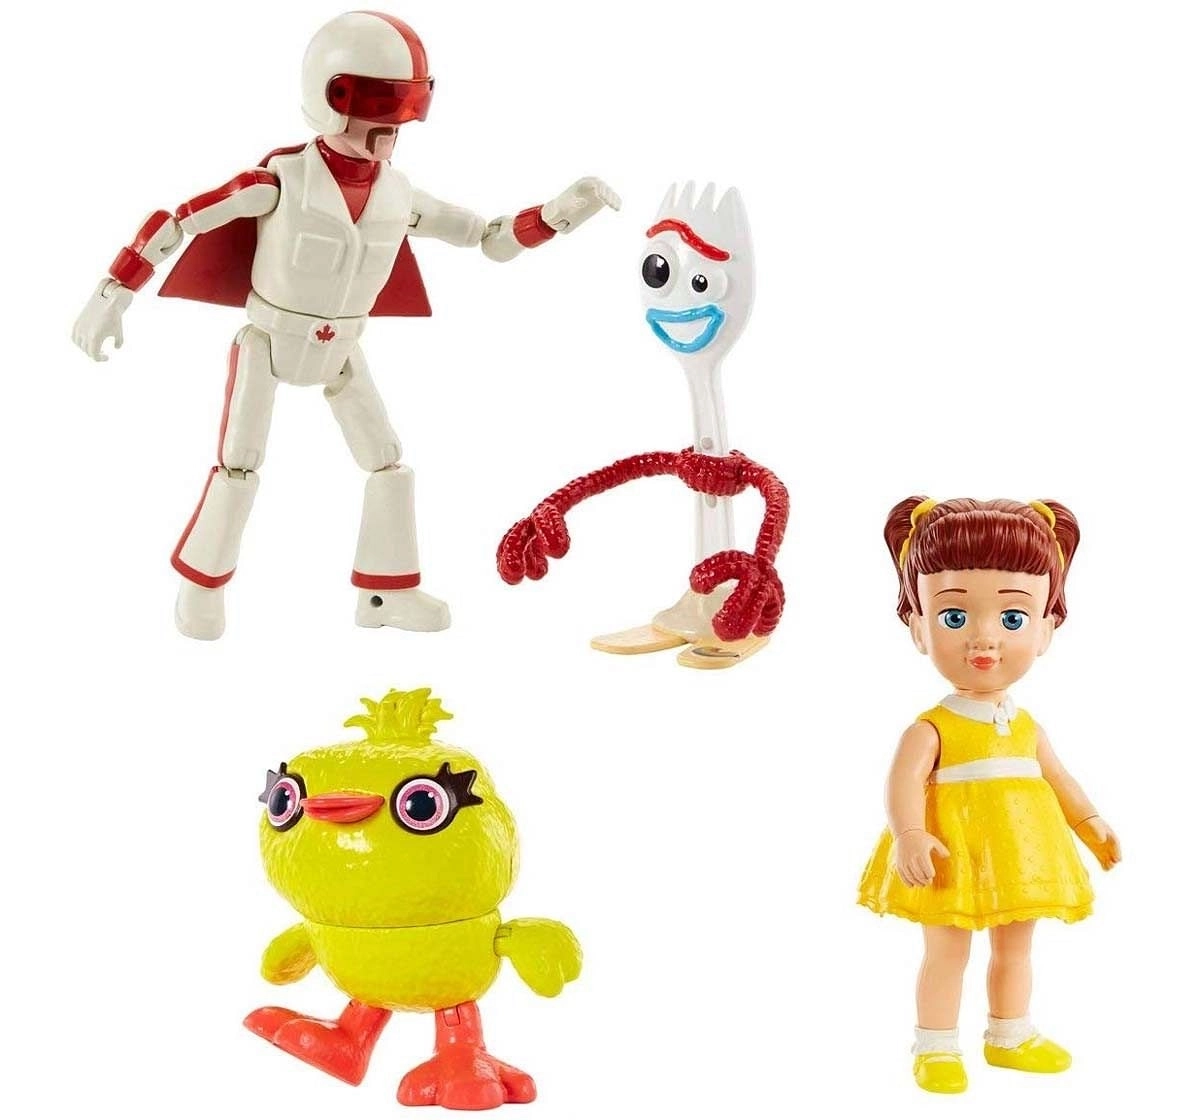 Toy Story 7" Inch Basic  Toystory4 Action Figures for Kids age 3Y+, Assorted